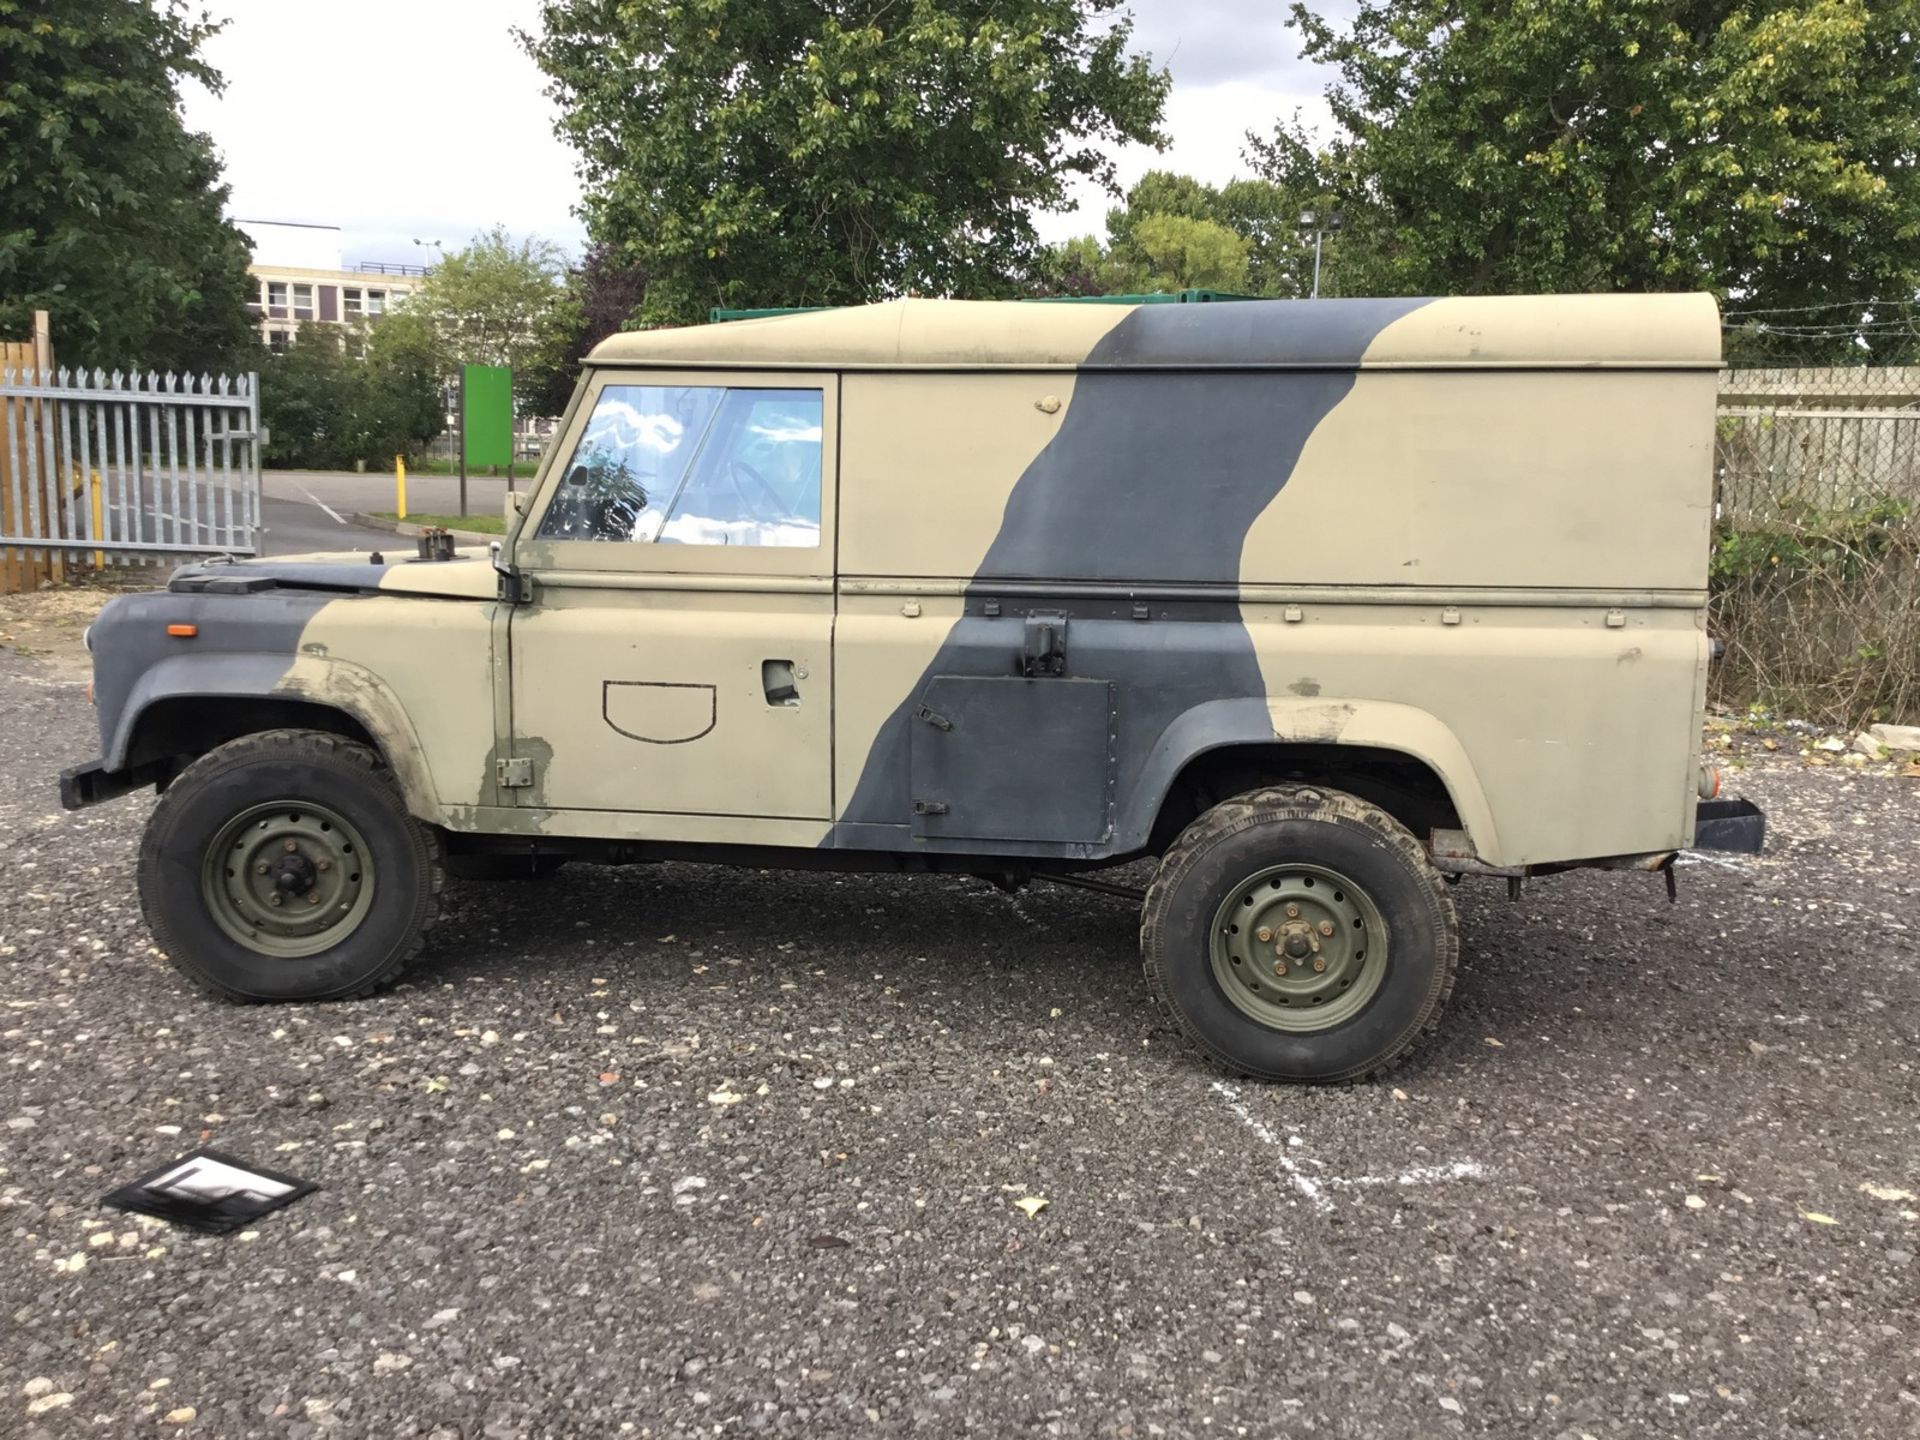 1990 Land Rover 110 Reg. no. Unregistered Chassis no. SALLDHAC7FA407380 Engine no. Unknown This